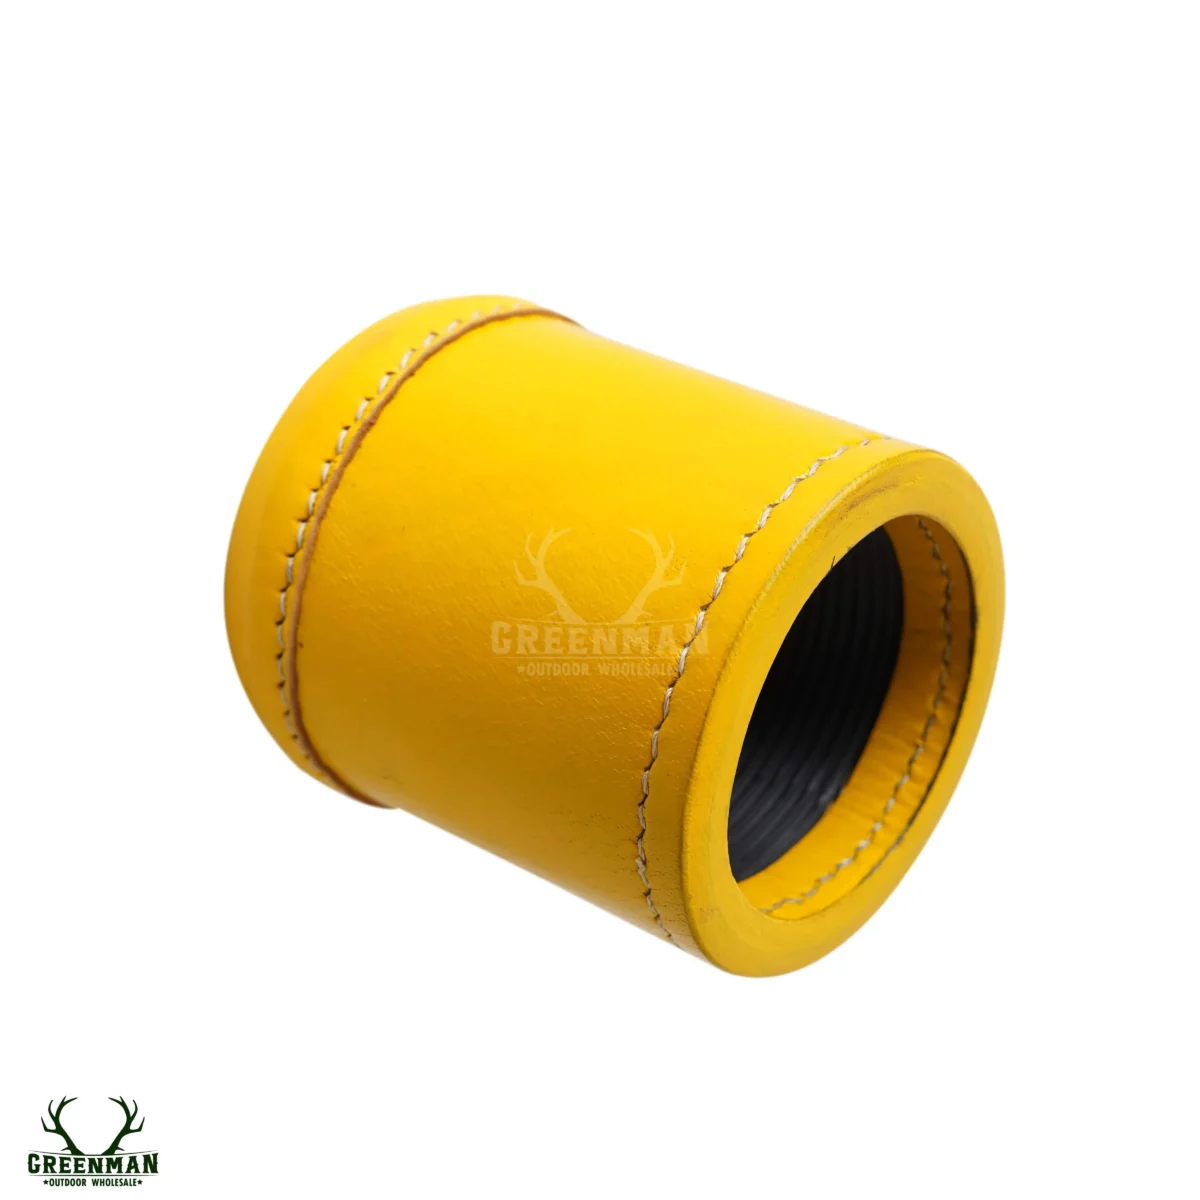 yellow leather dice cup, leather dice shaker. ribbed interior leather dice cup